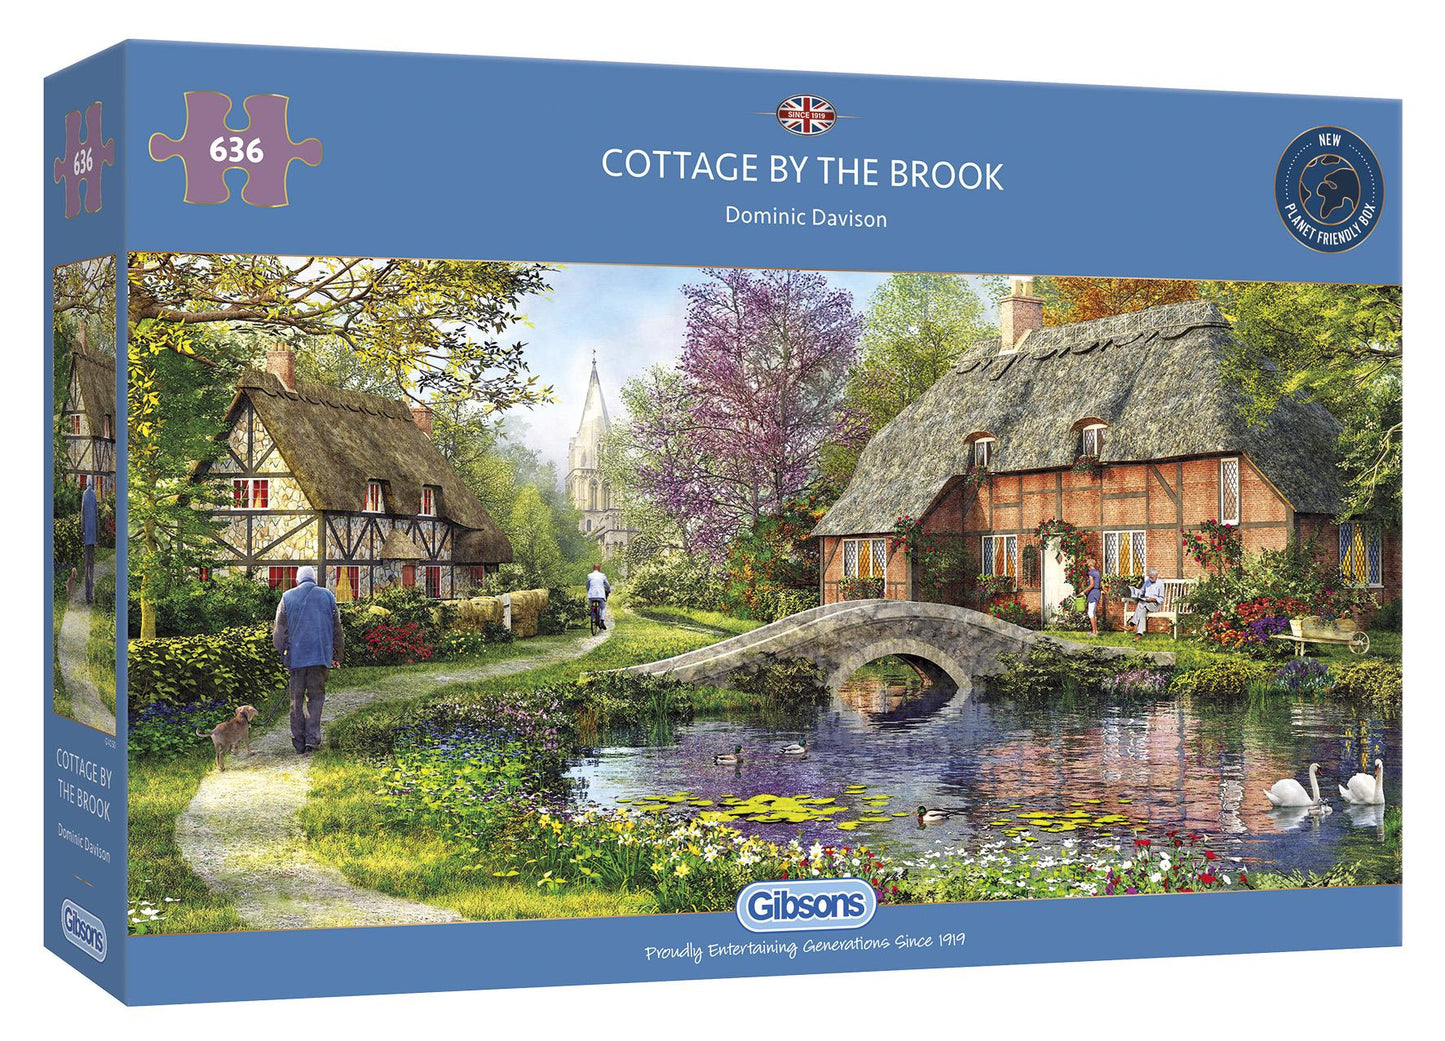 Cottage by the Brook 636 Piece Jigsaw Puzzle